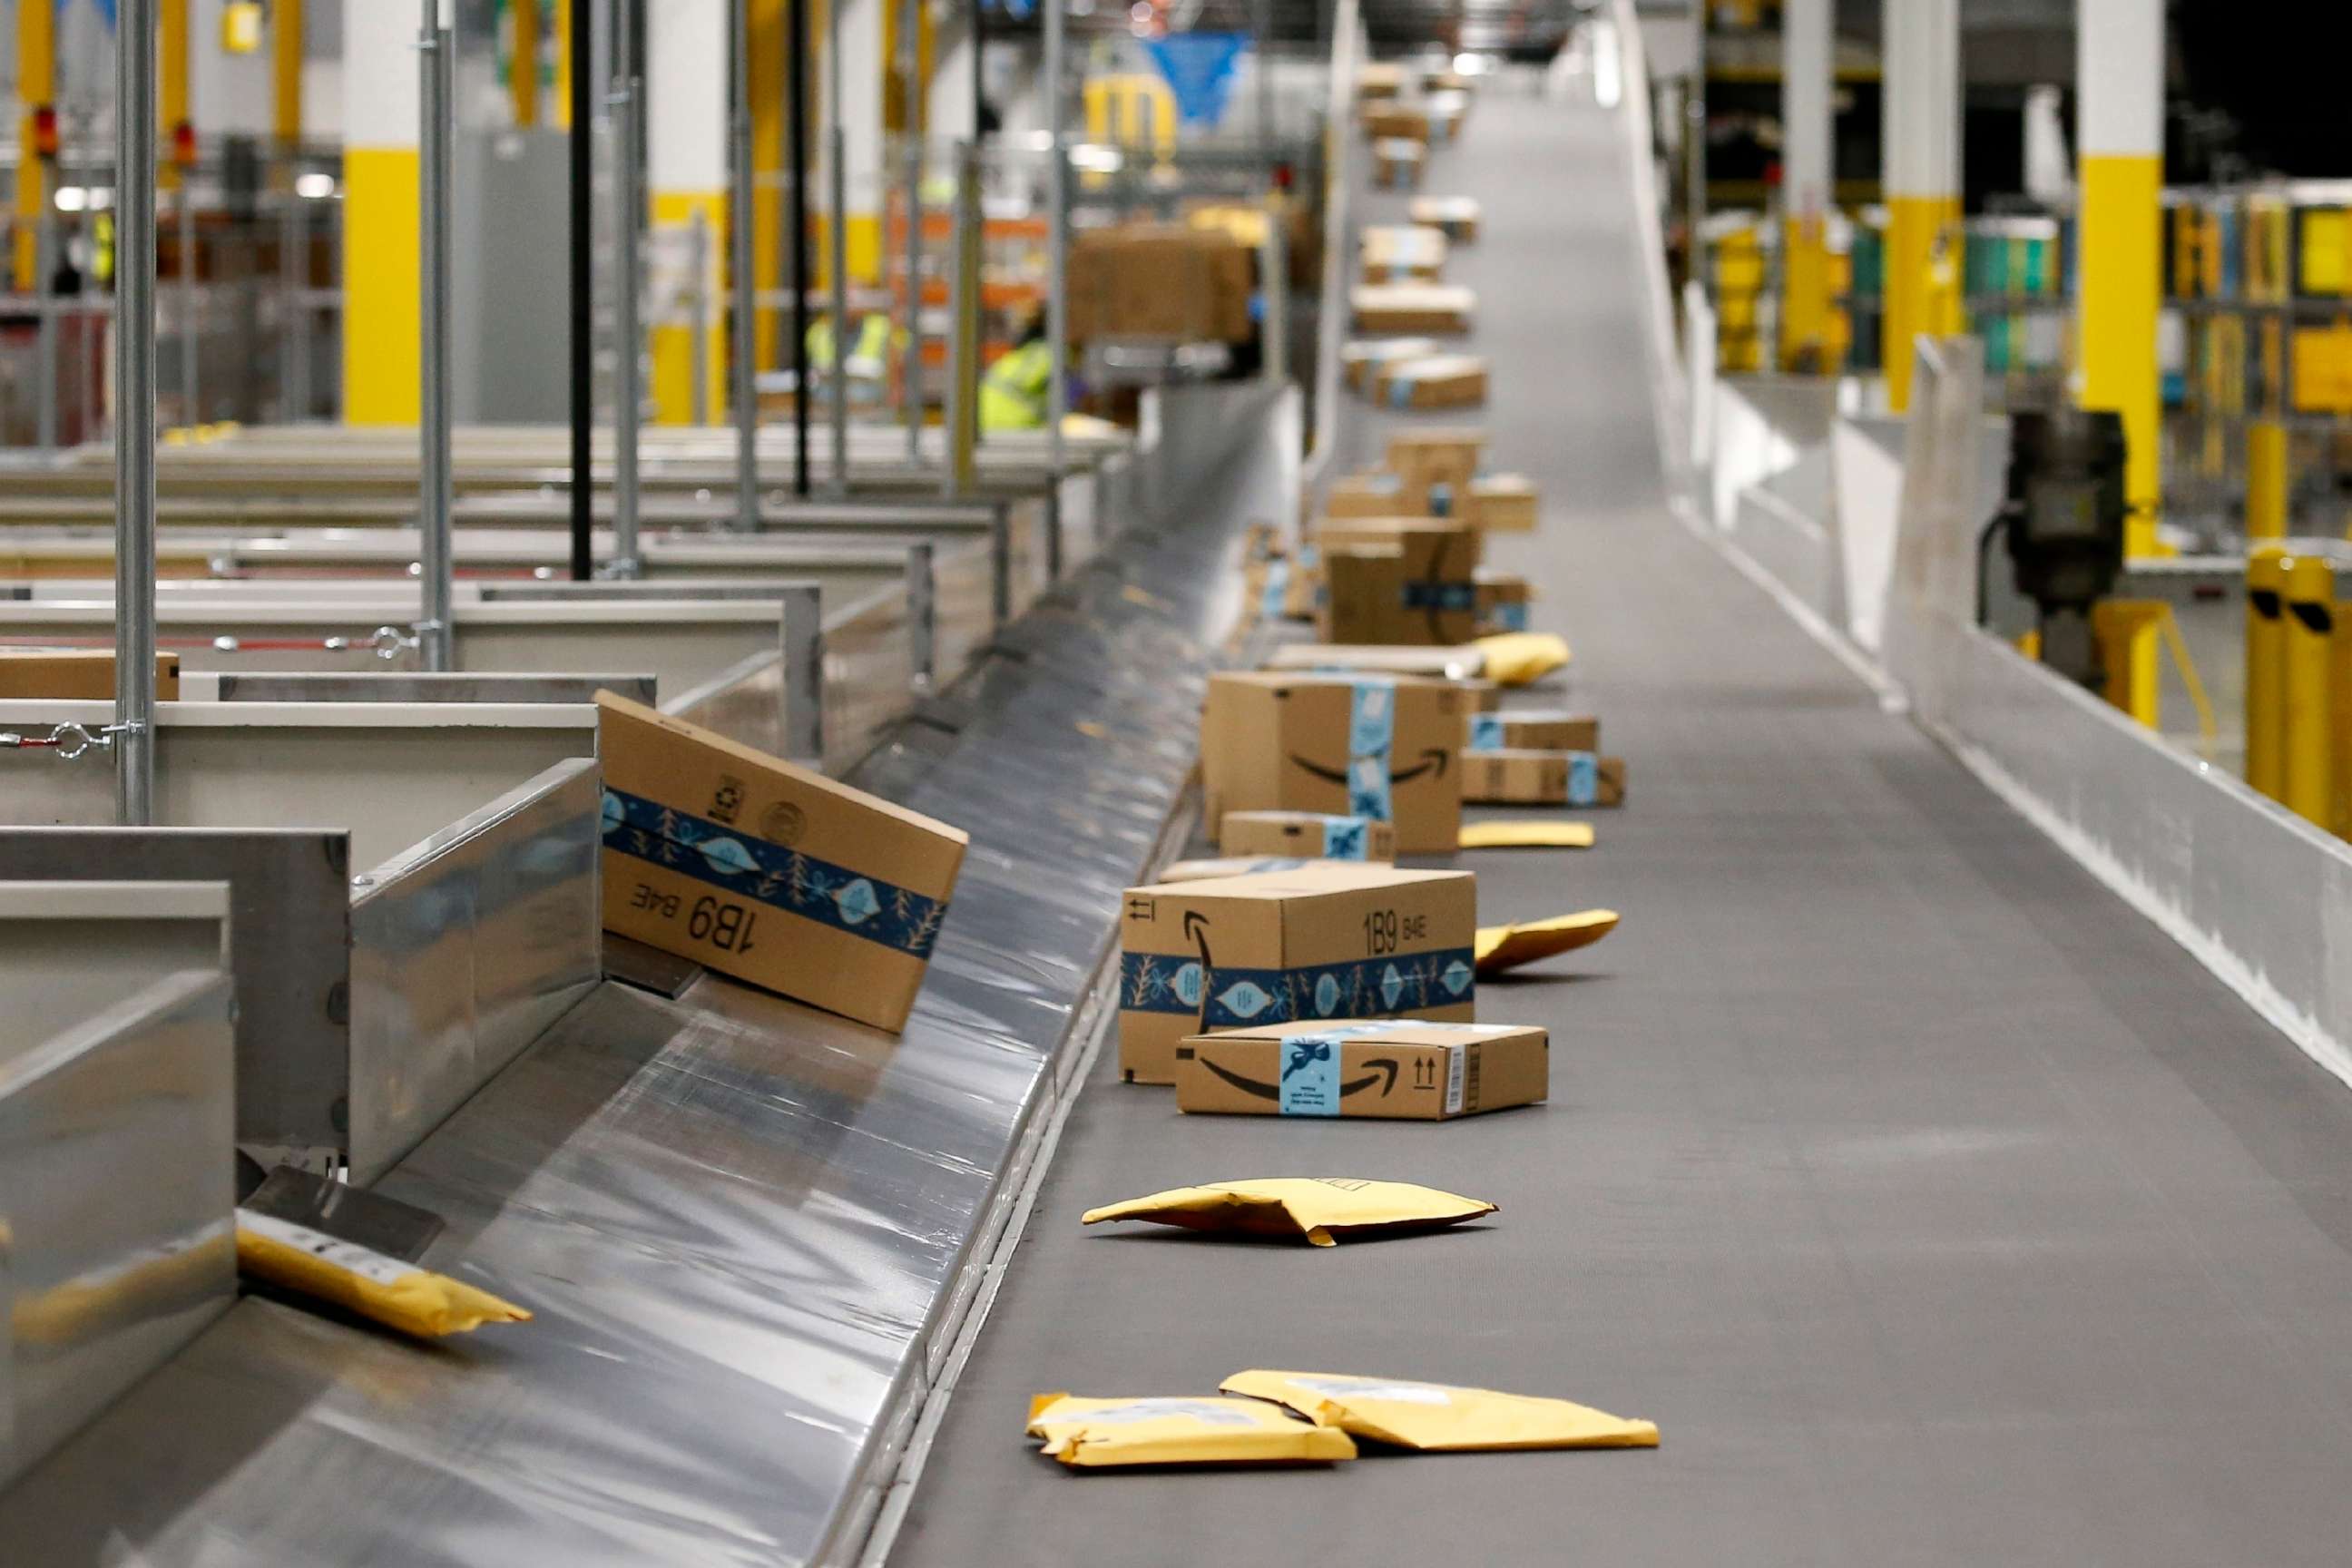 PHOTO: Amazon packages move along a conveyor at an Amazon warehouse facility in Goodyear, Ariz., Dec. 17, 2019.